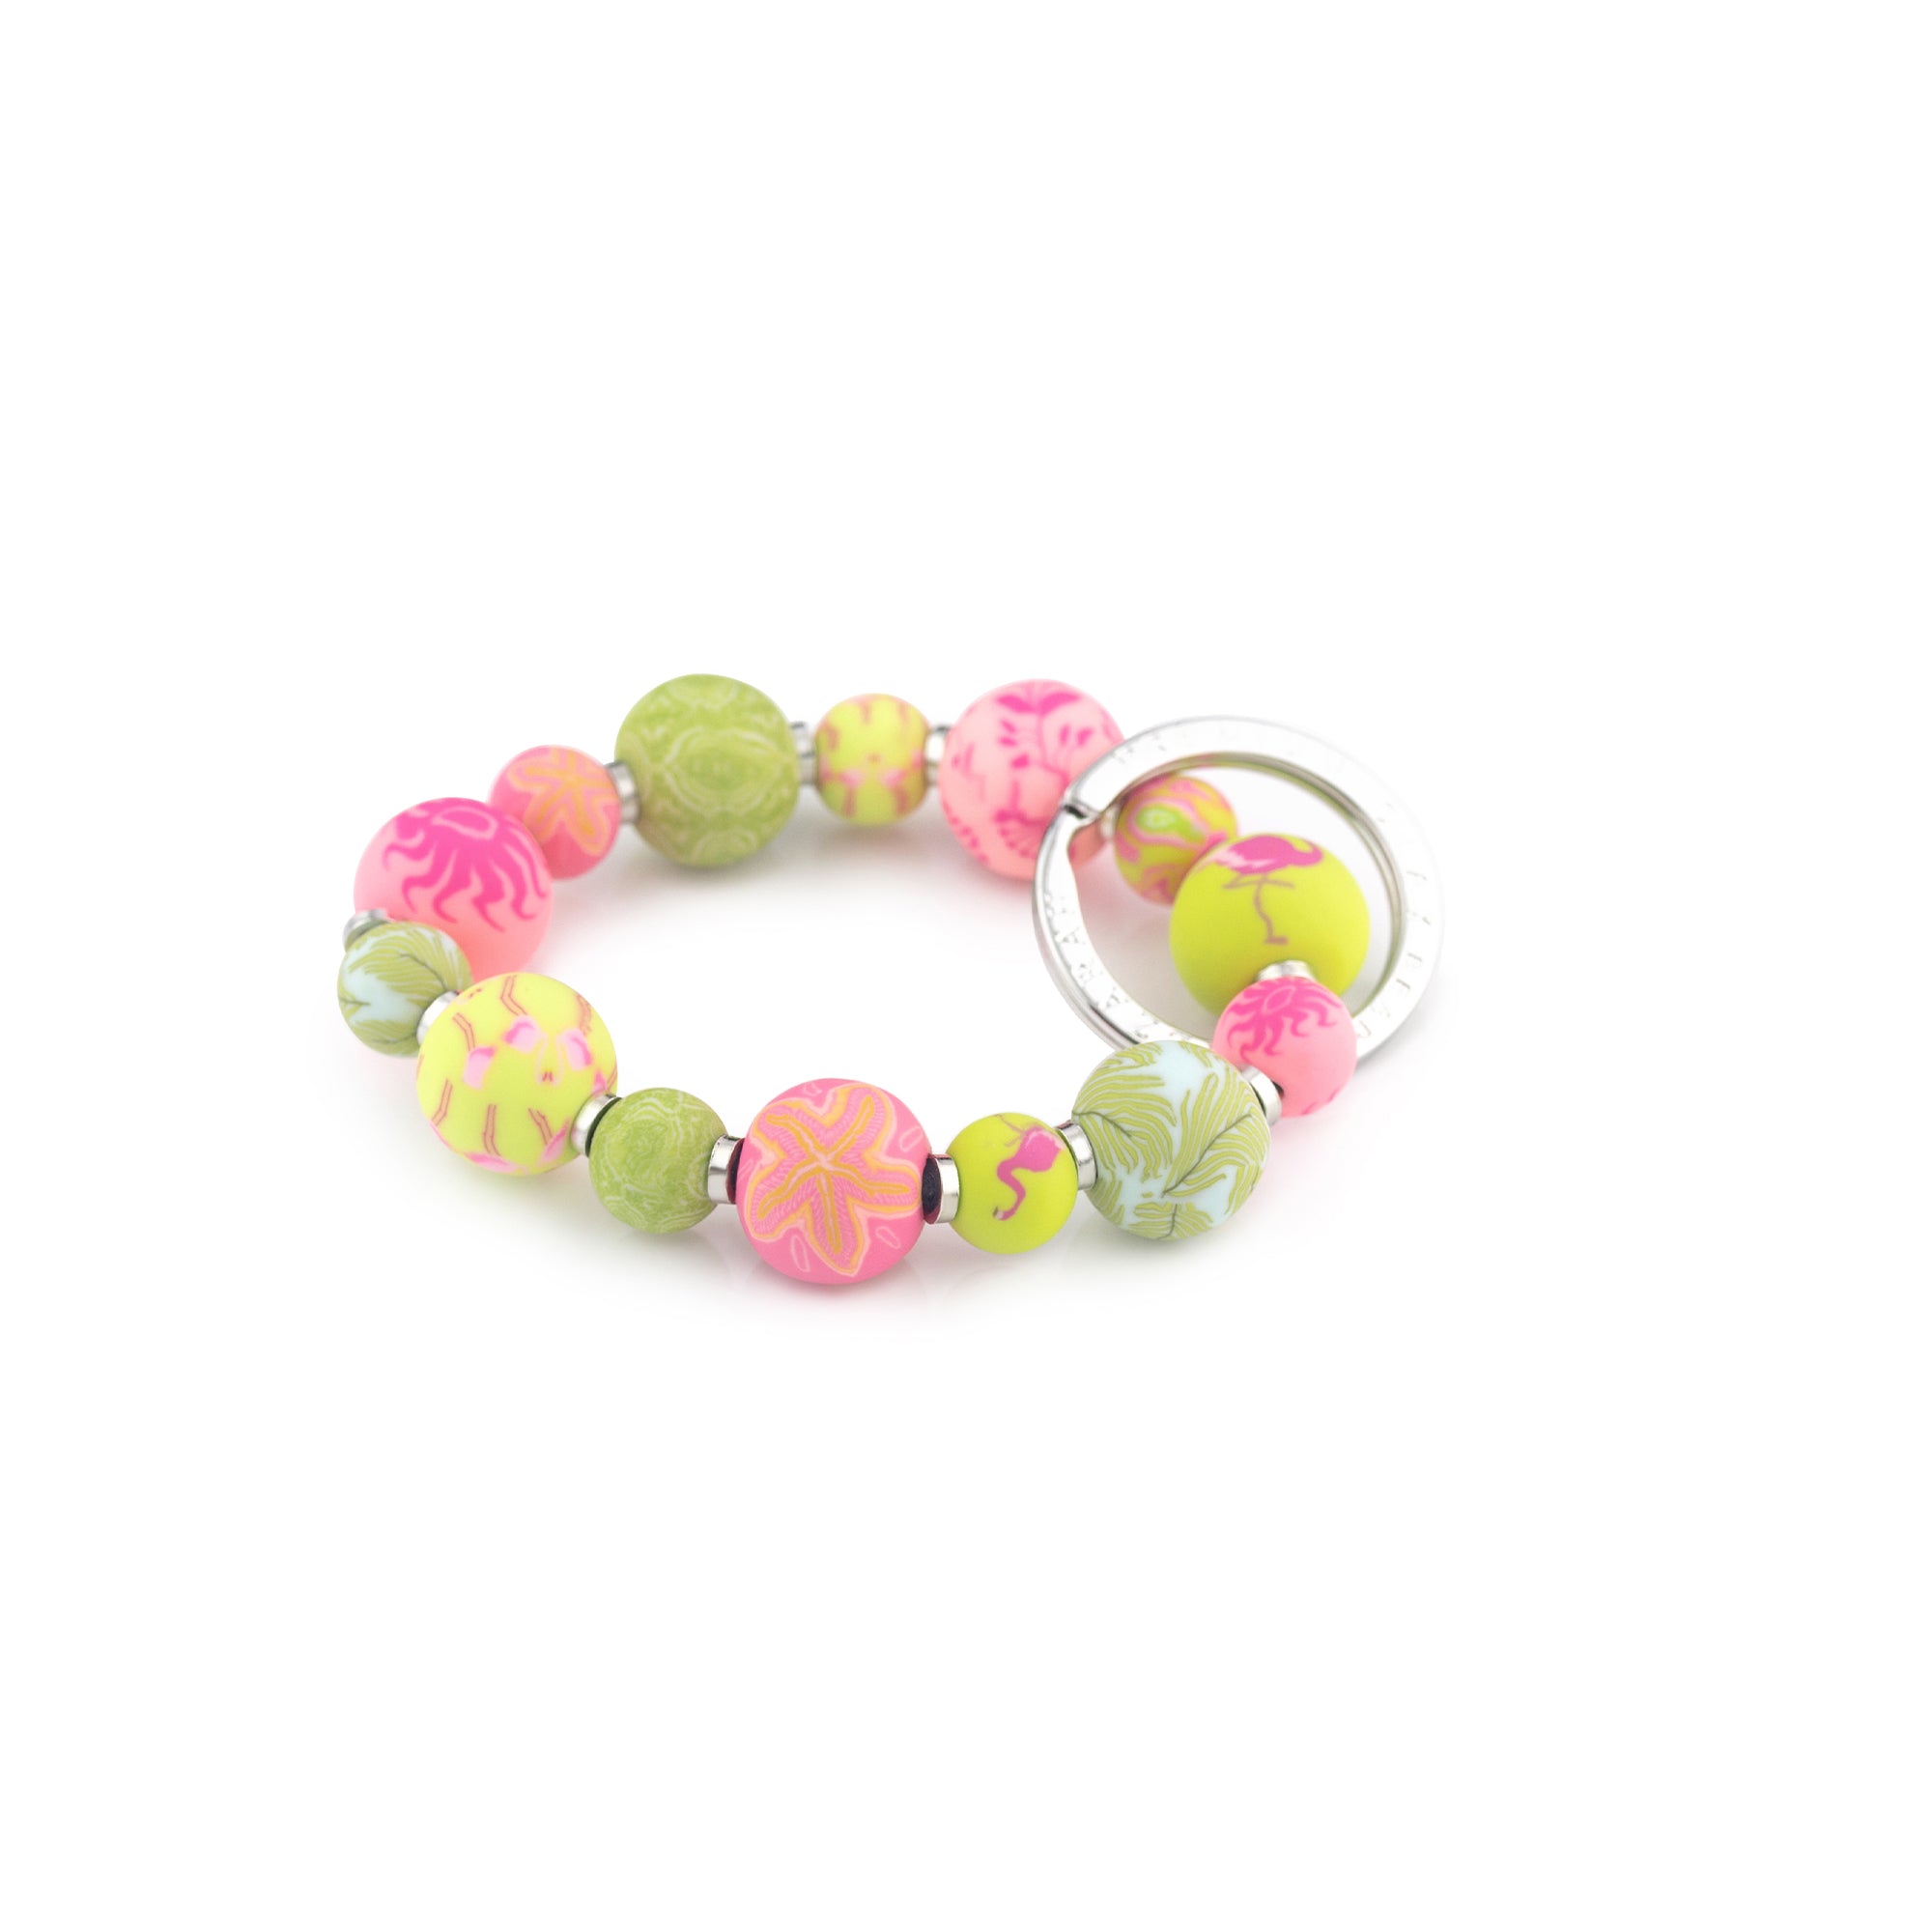 Pink Green Yellow Clay Beaded Bracelet